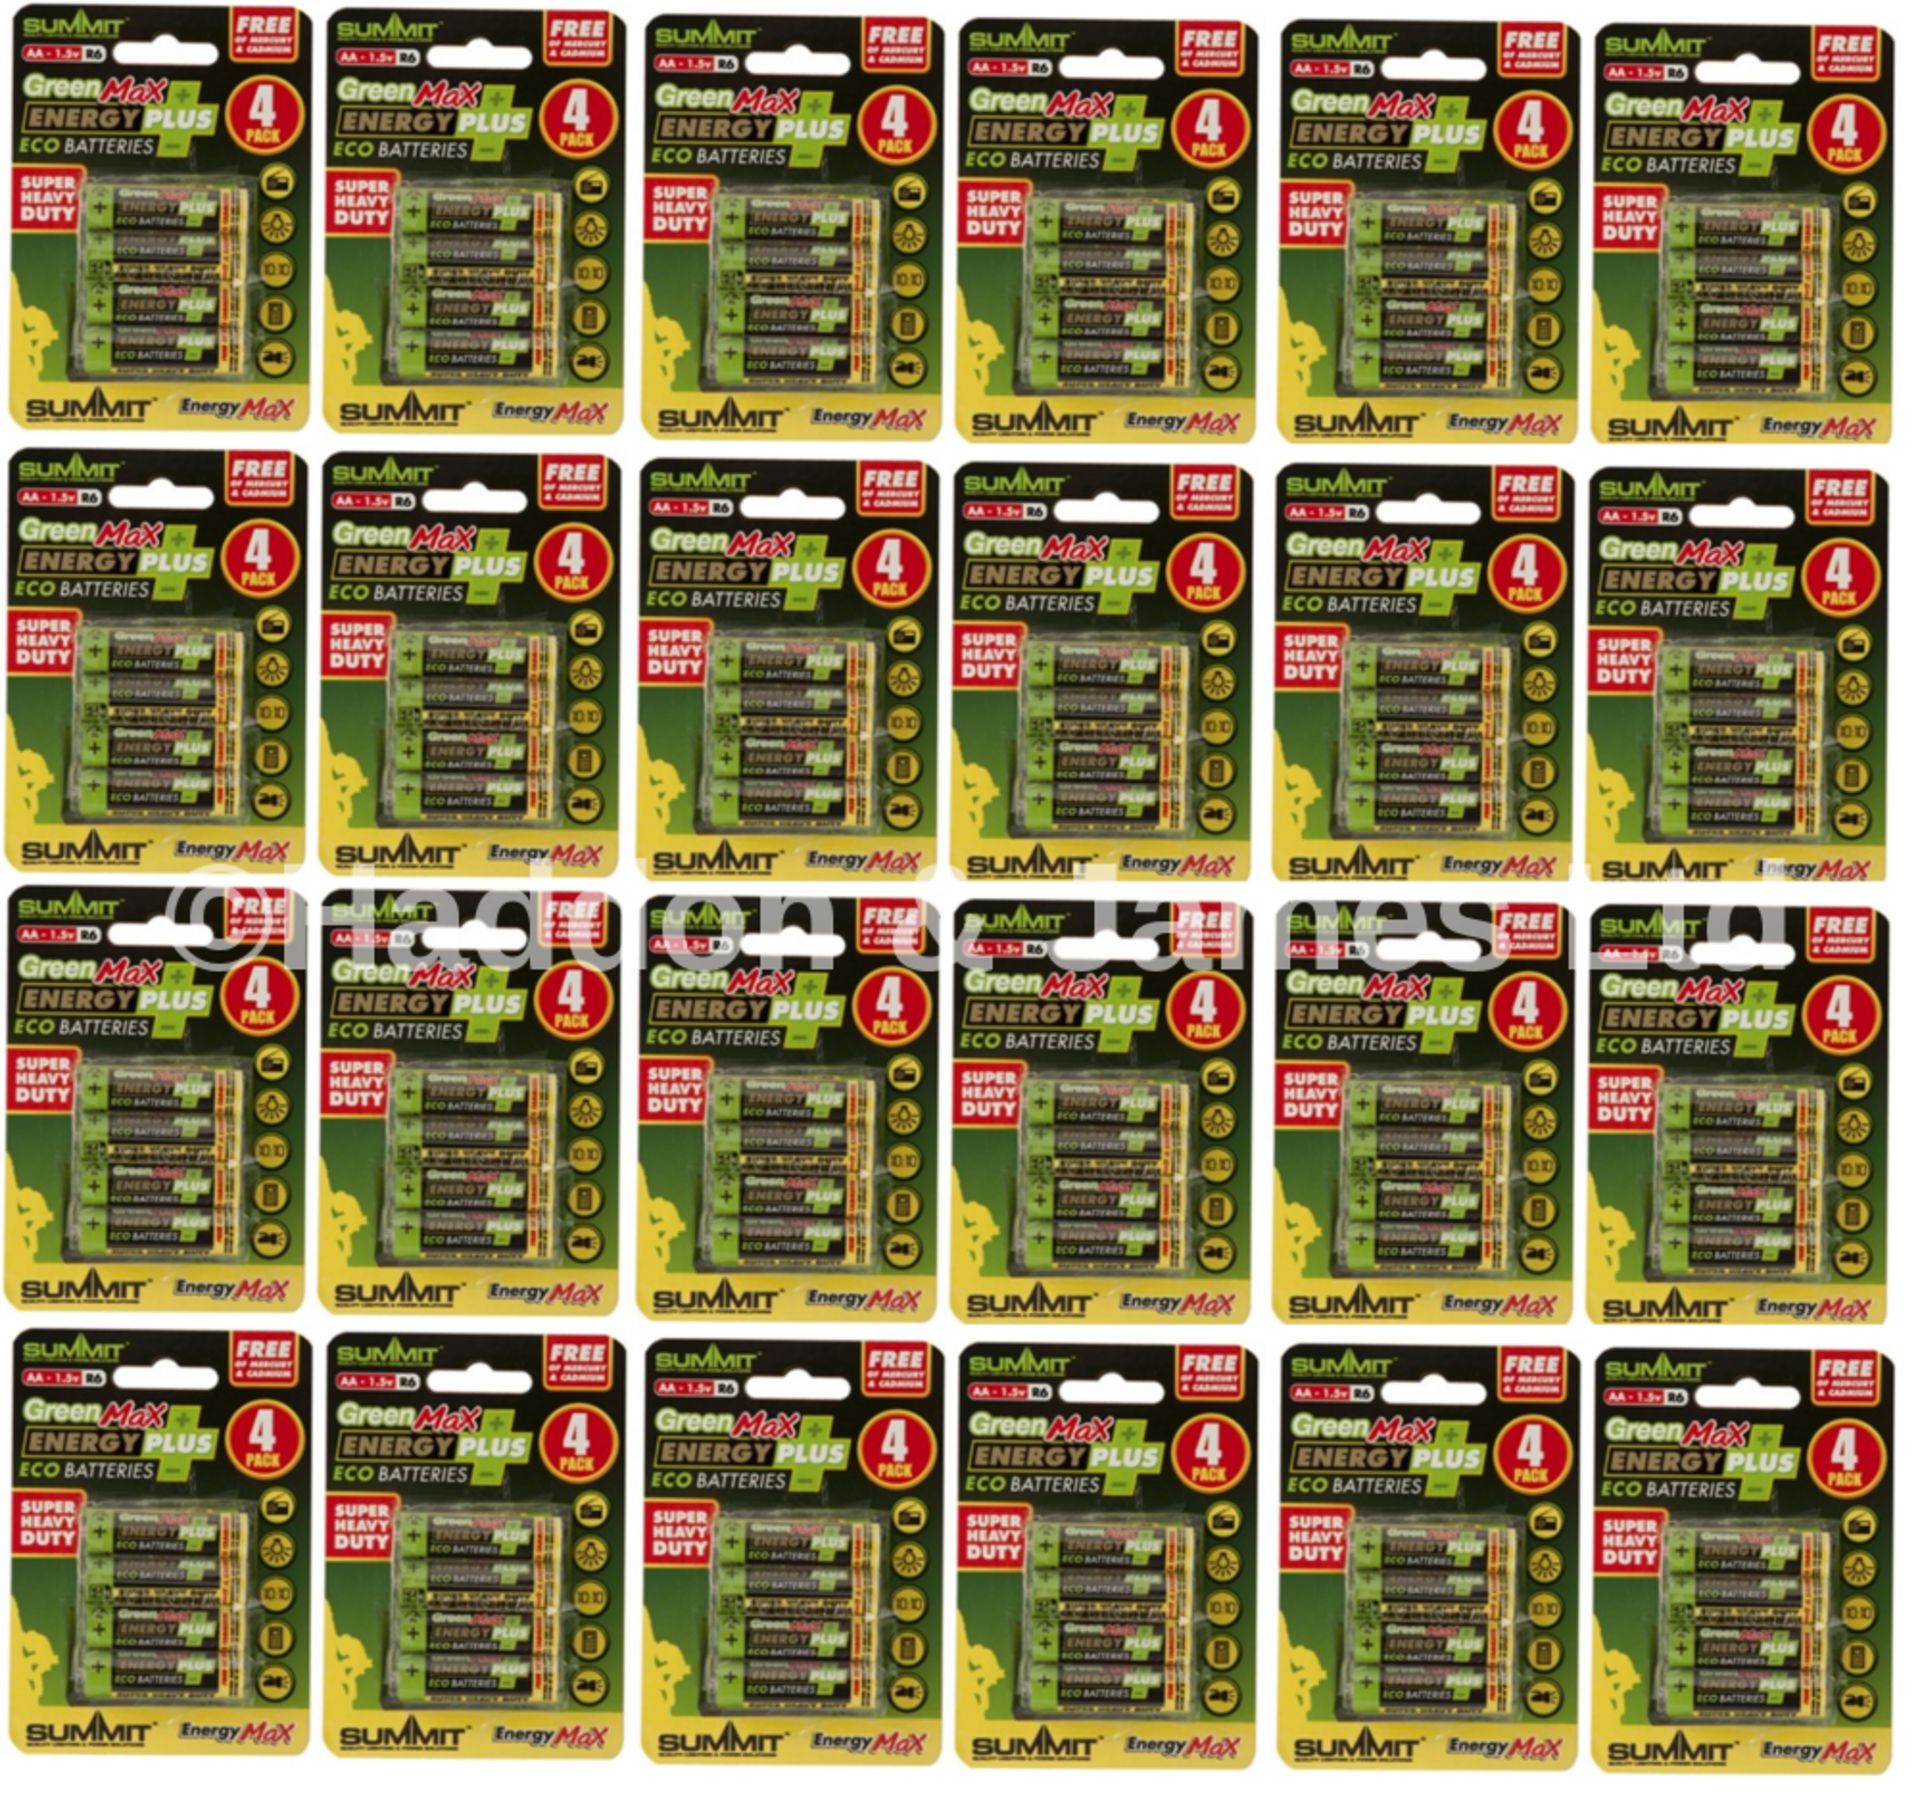 V Brand New Ninety Six Energy Plus Batteries (24 Cards Of 4) X 2 YOUR BID PRICE TO BE MULTIPLIED